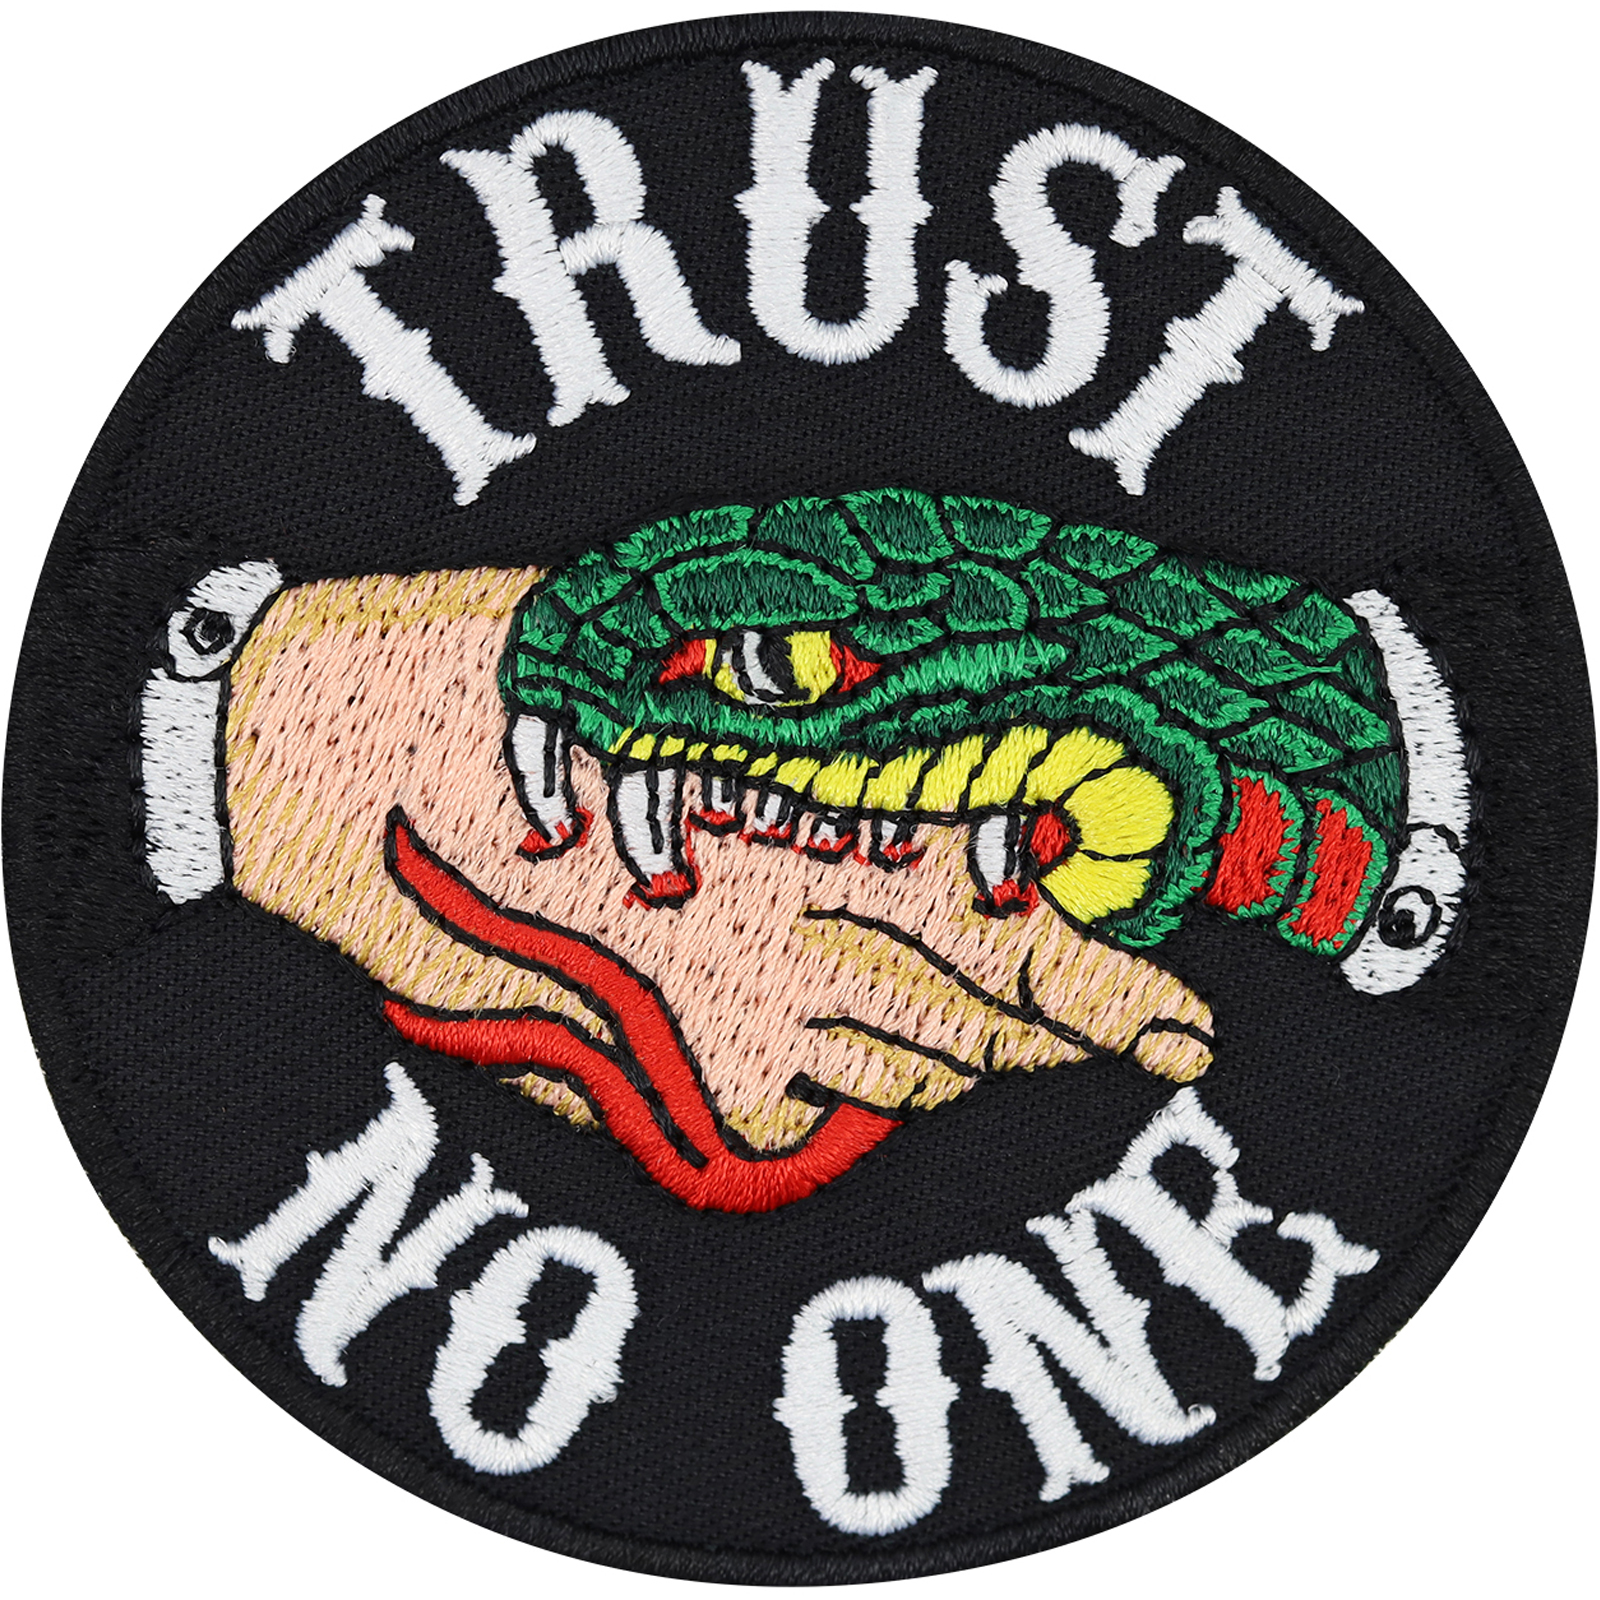 Trust no one - Patch